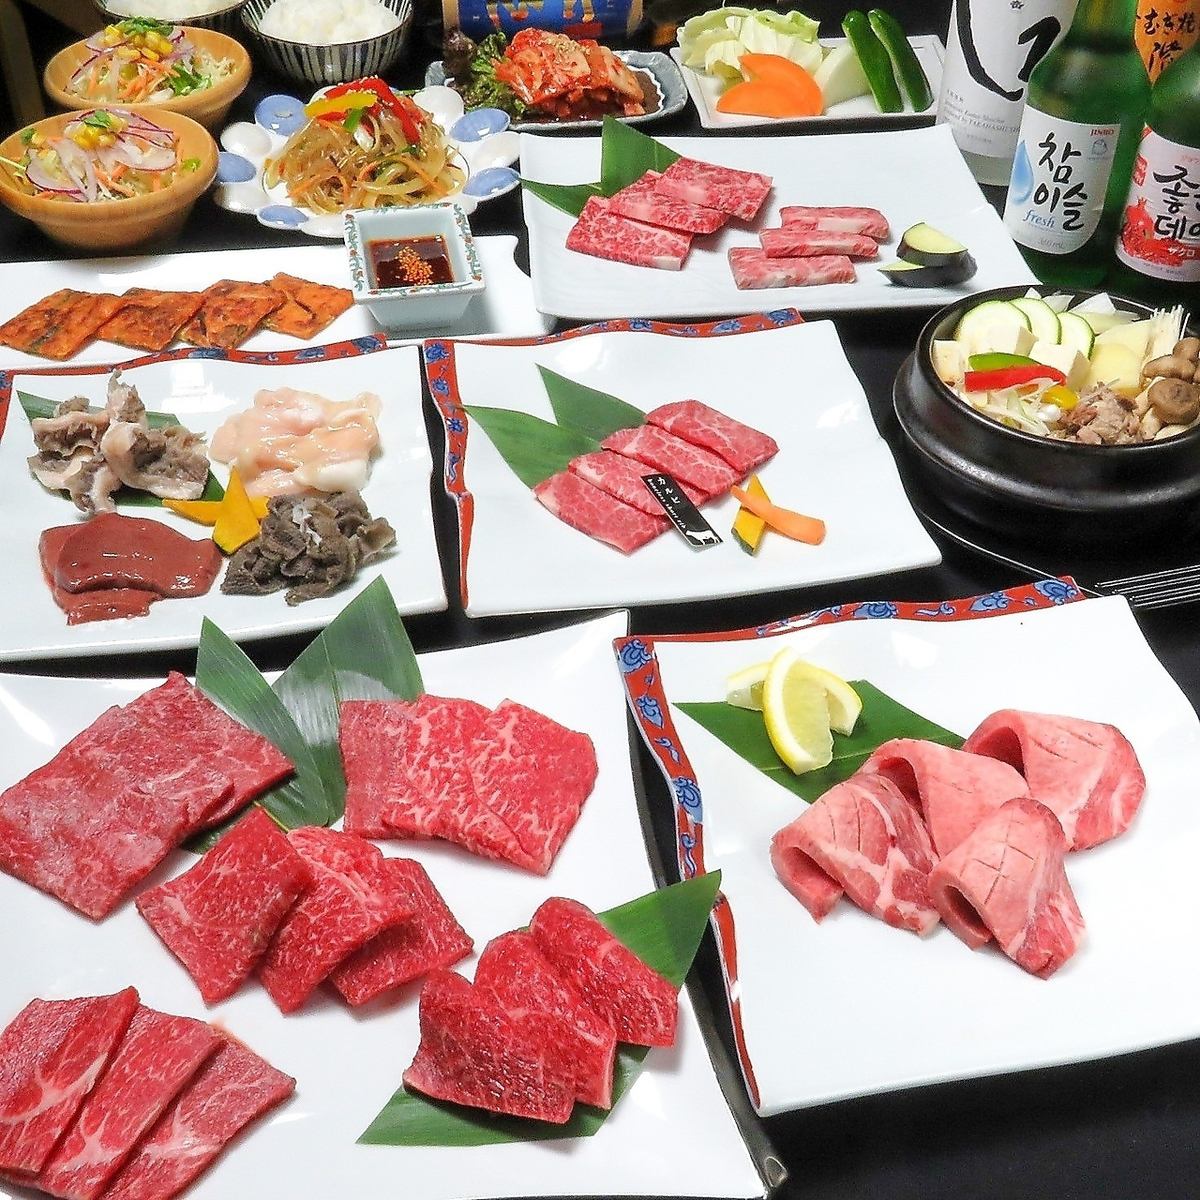 1.5 hours of all-you-can-eat "Kuroge Wagyu Beef from Miyazaki Prefecture" is a bargain! Group discounts are also available!